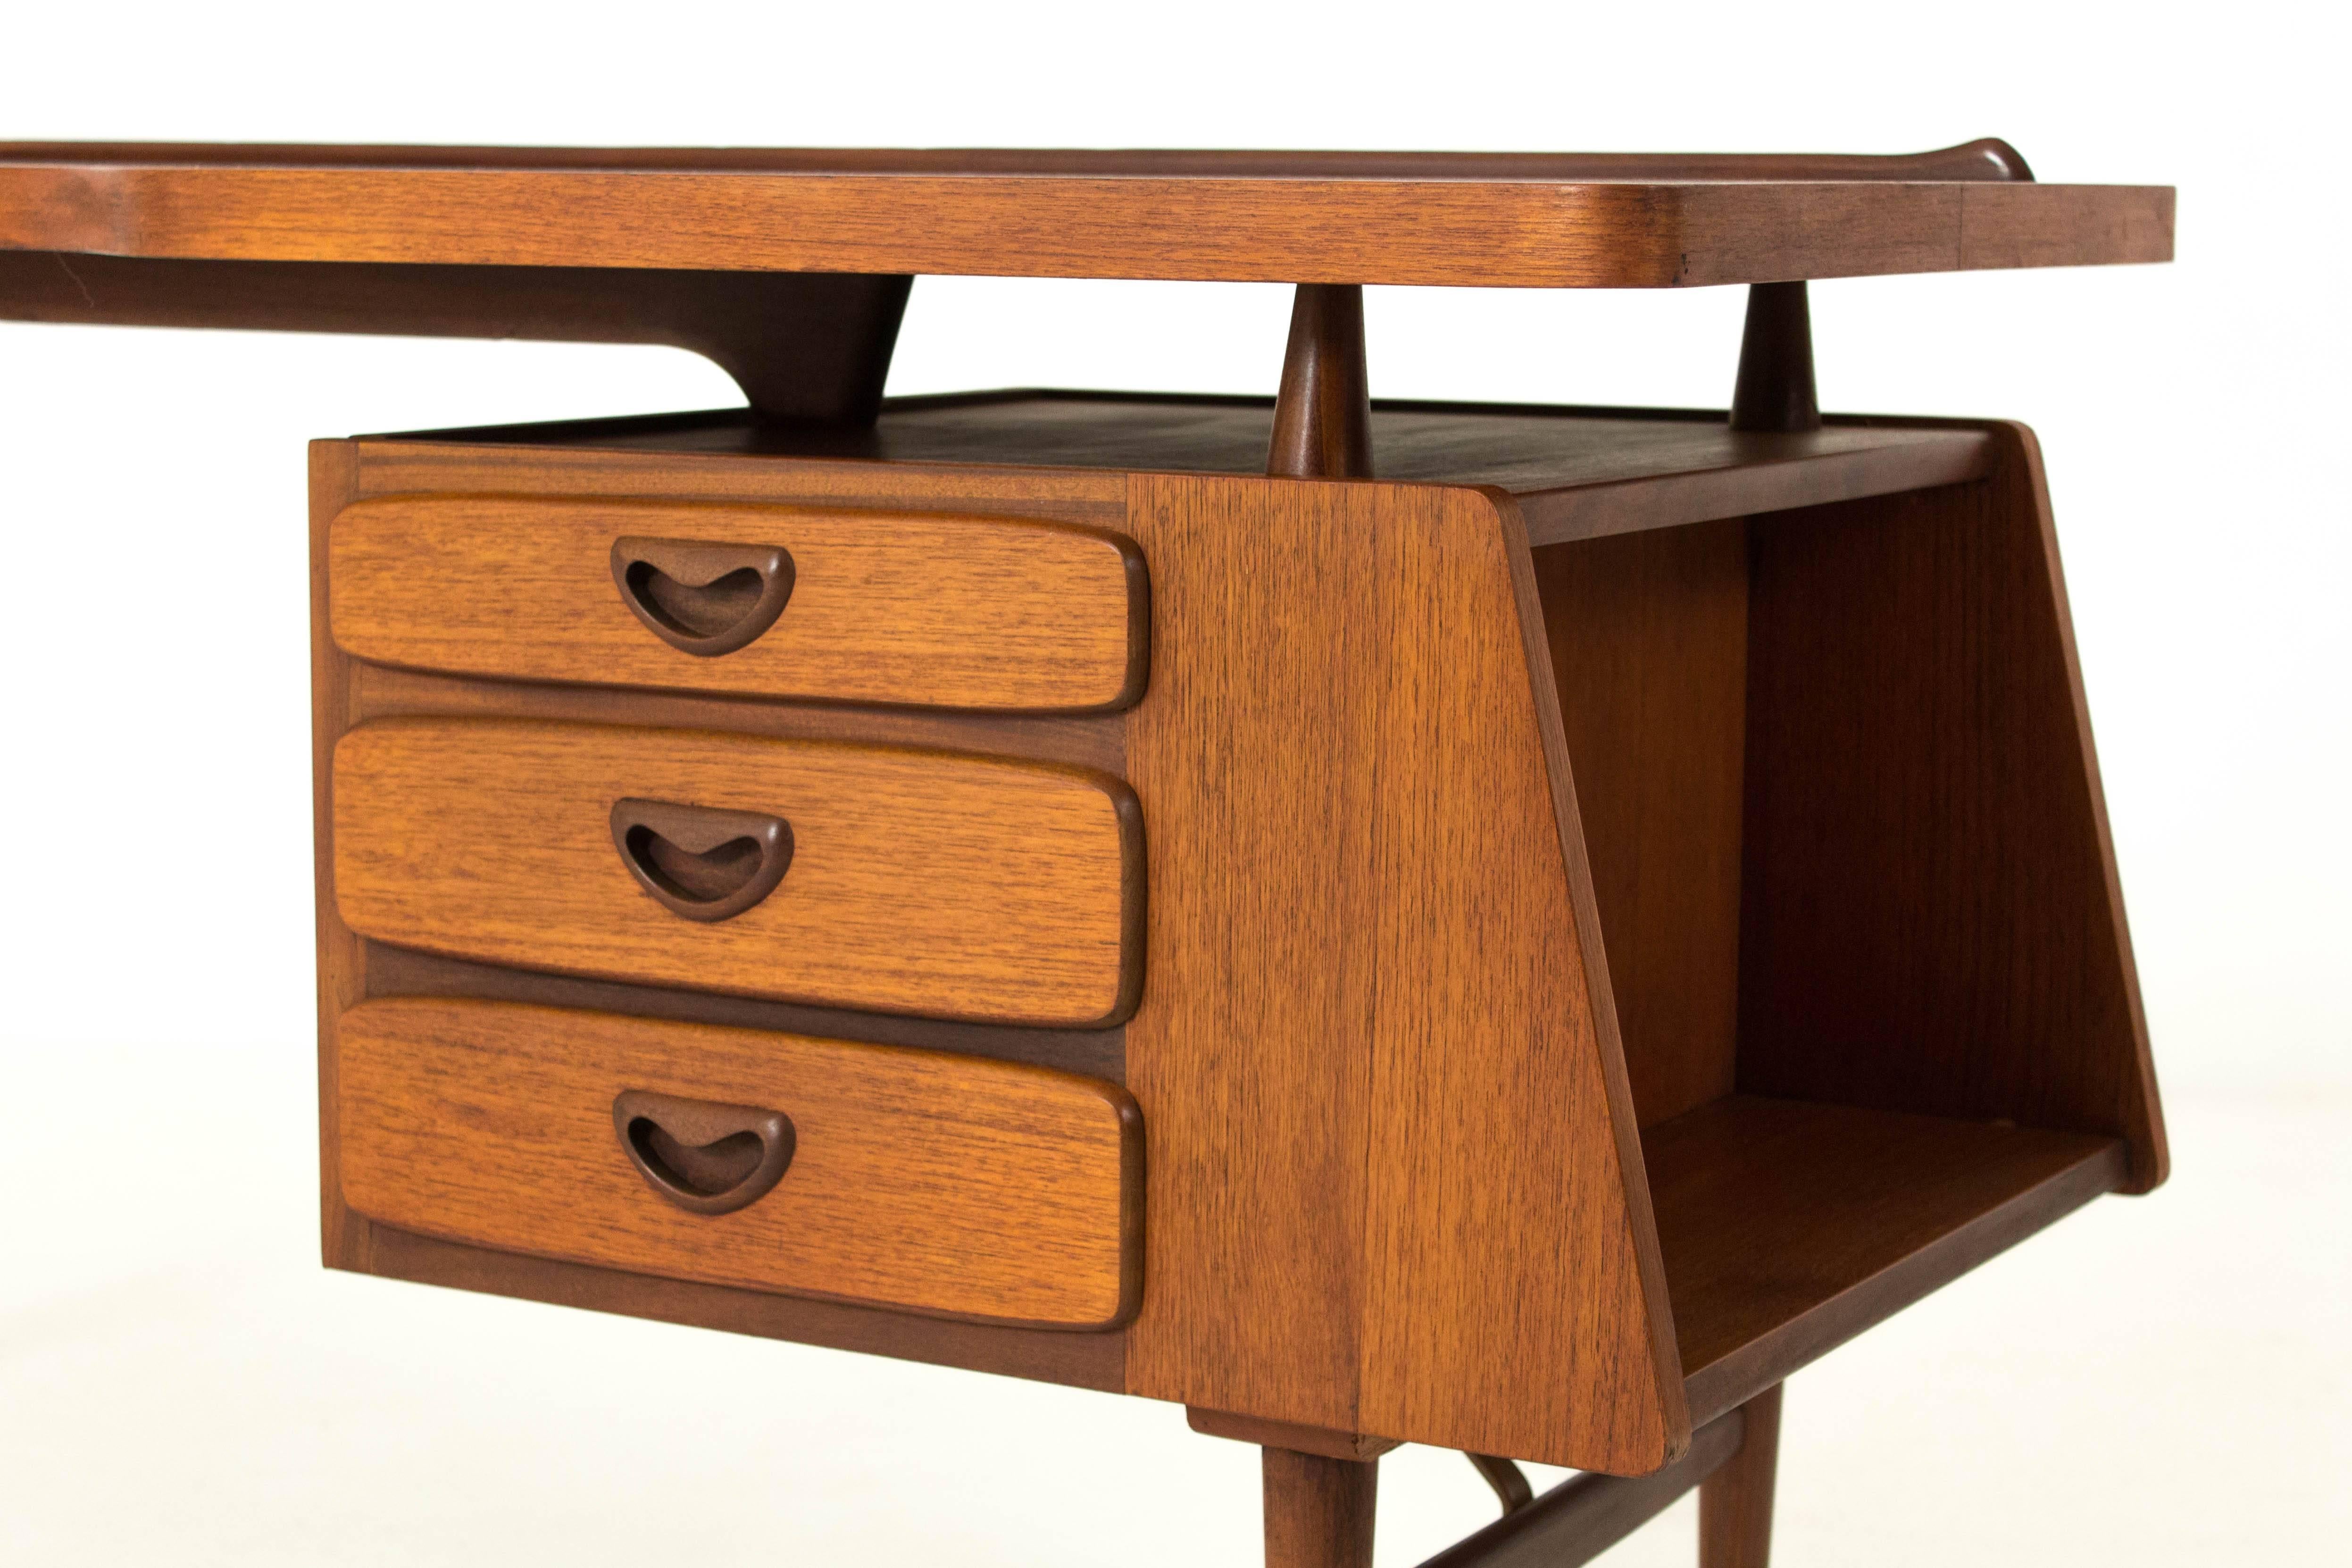 Iconic Mid-Century Modern desk by Louis van Teeffelen for Webe 1959.
Striking design with floating top.
Teak with brass supports.
Please note that our desk is 100% original with the correct support between
the curved and tapered legs on the left